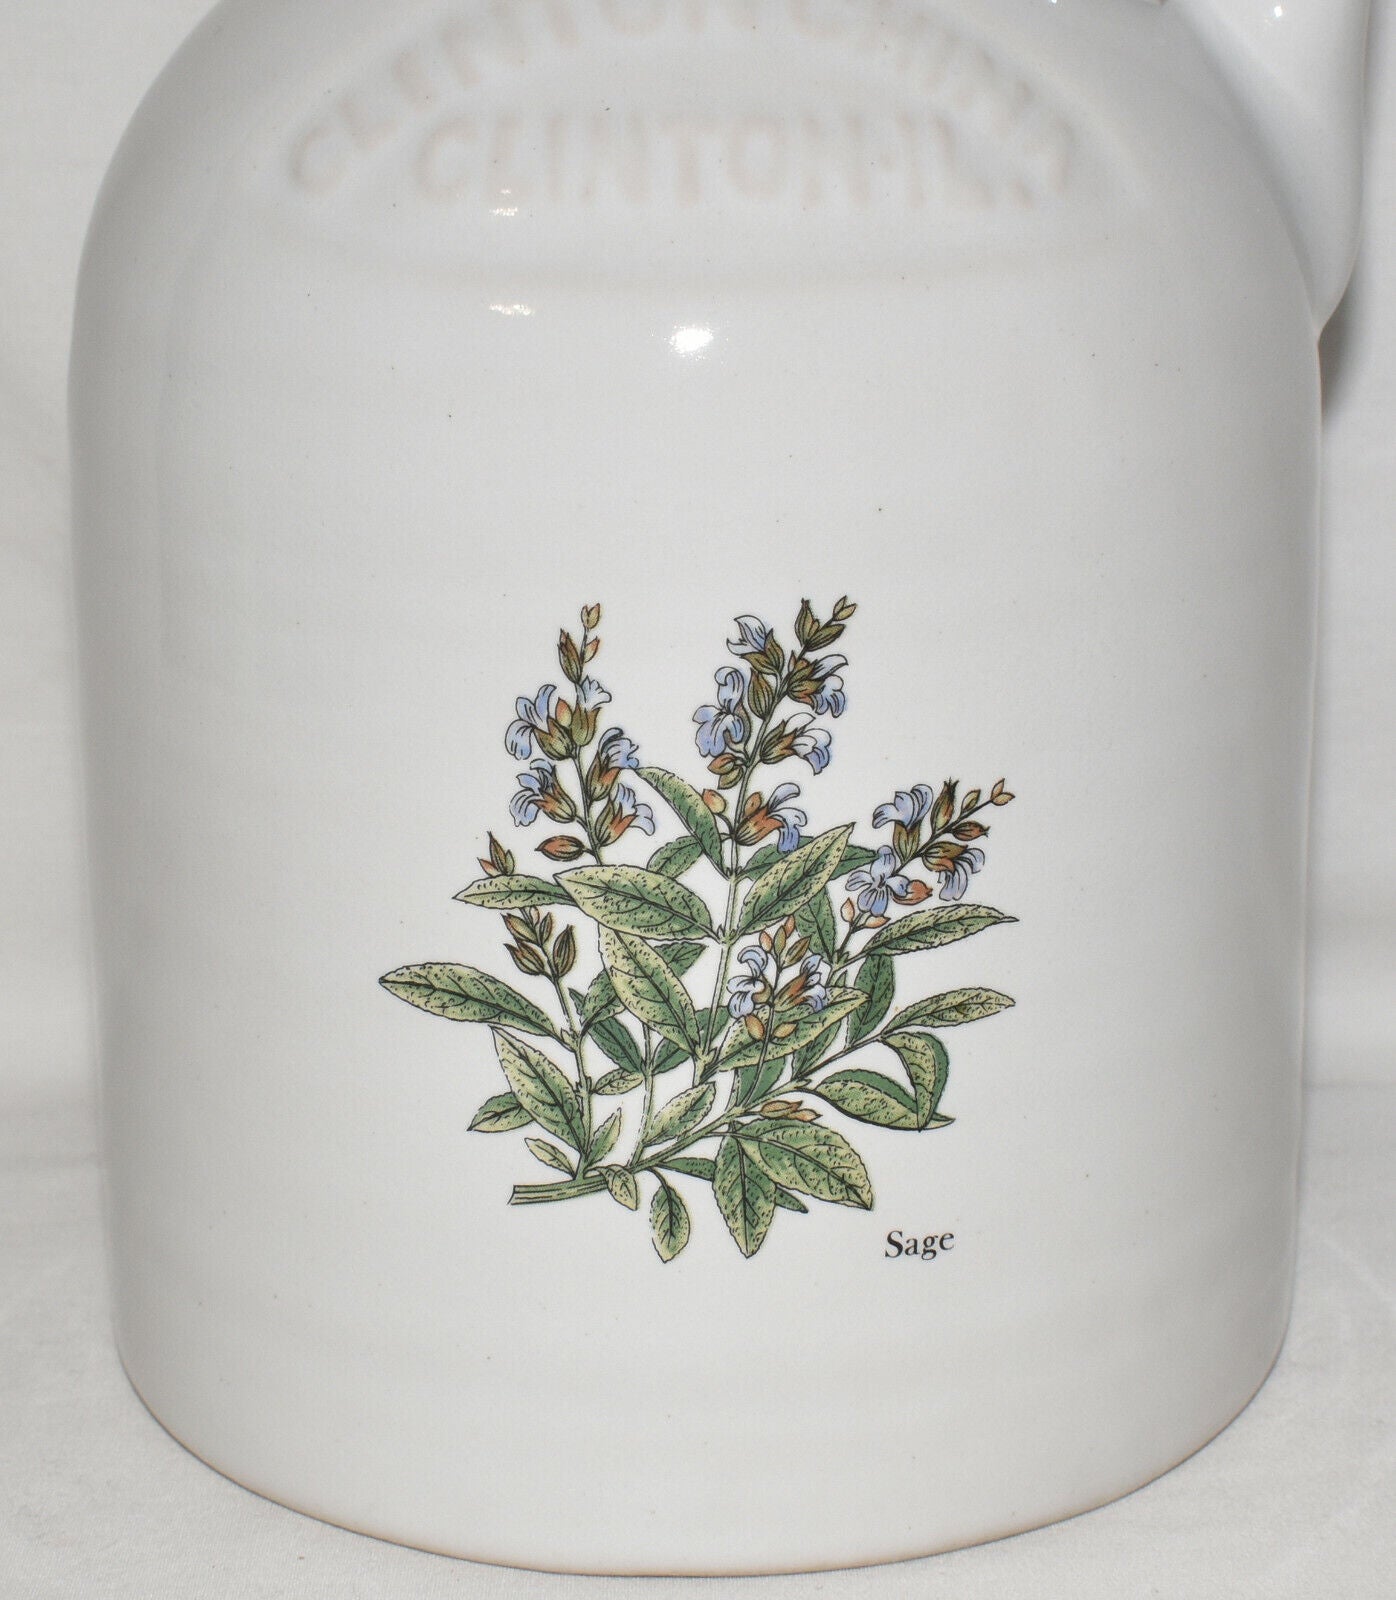 Vintage Hand Turned Stoneware Jug Embossed Pottery Clinton China Clinton IL